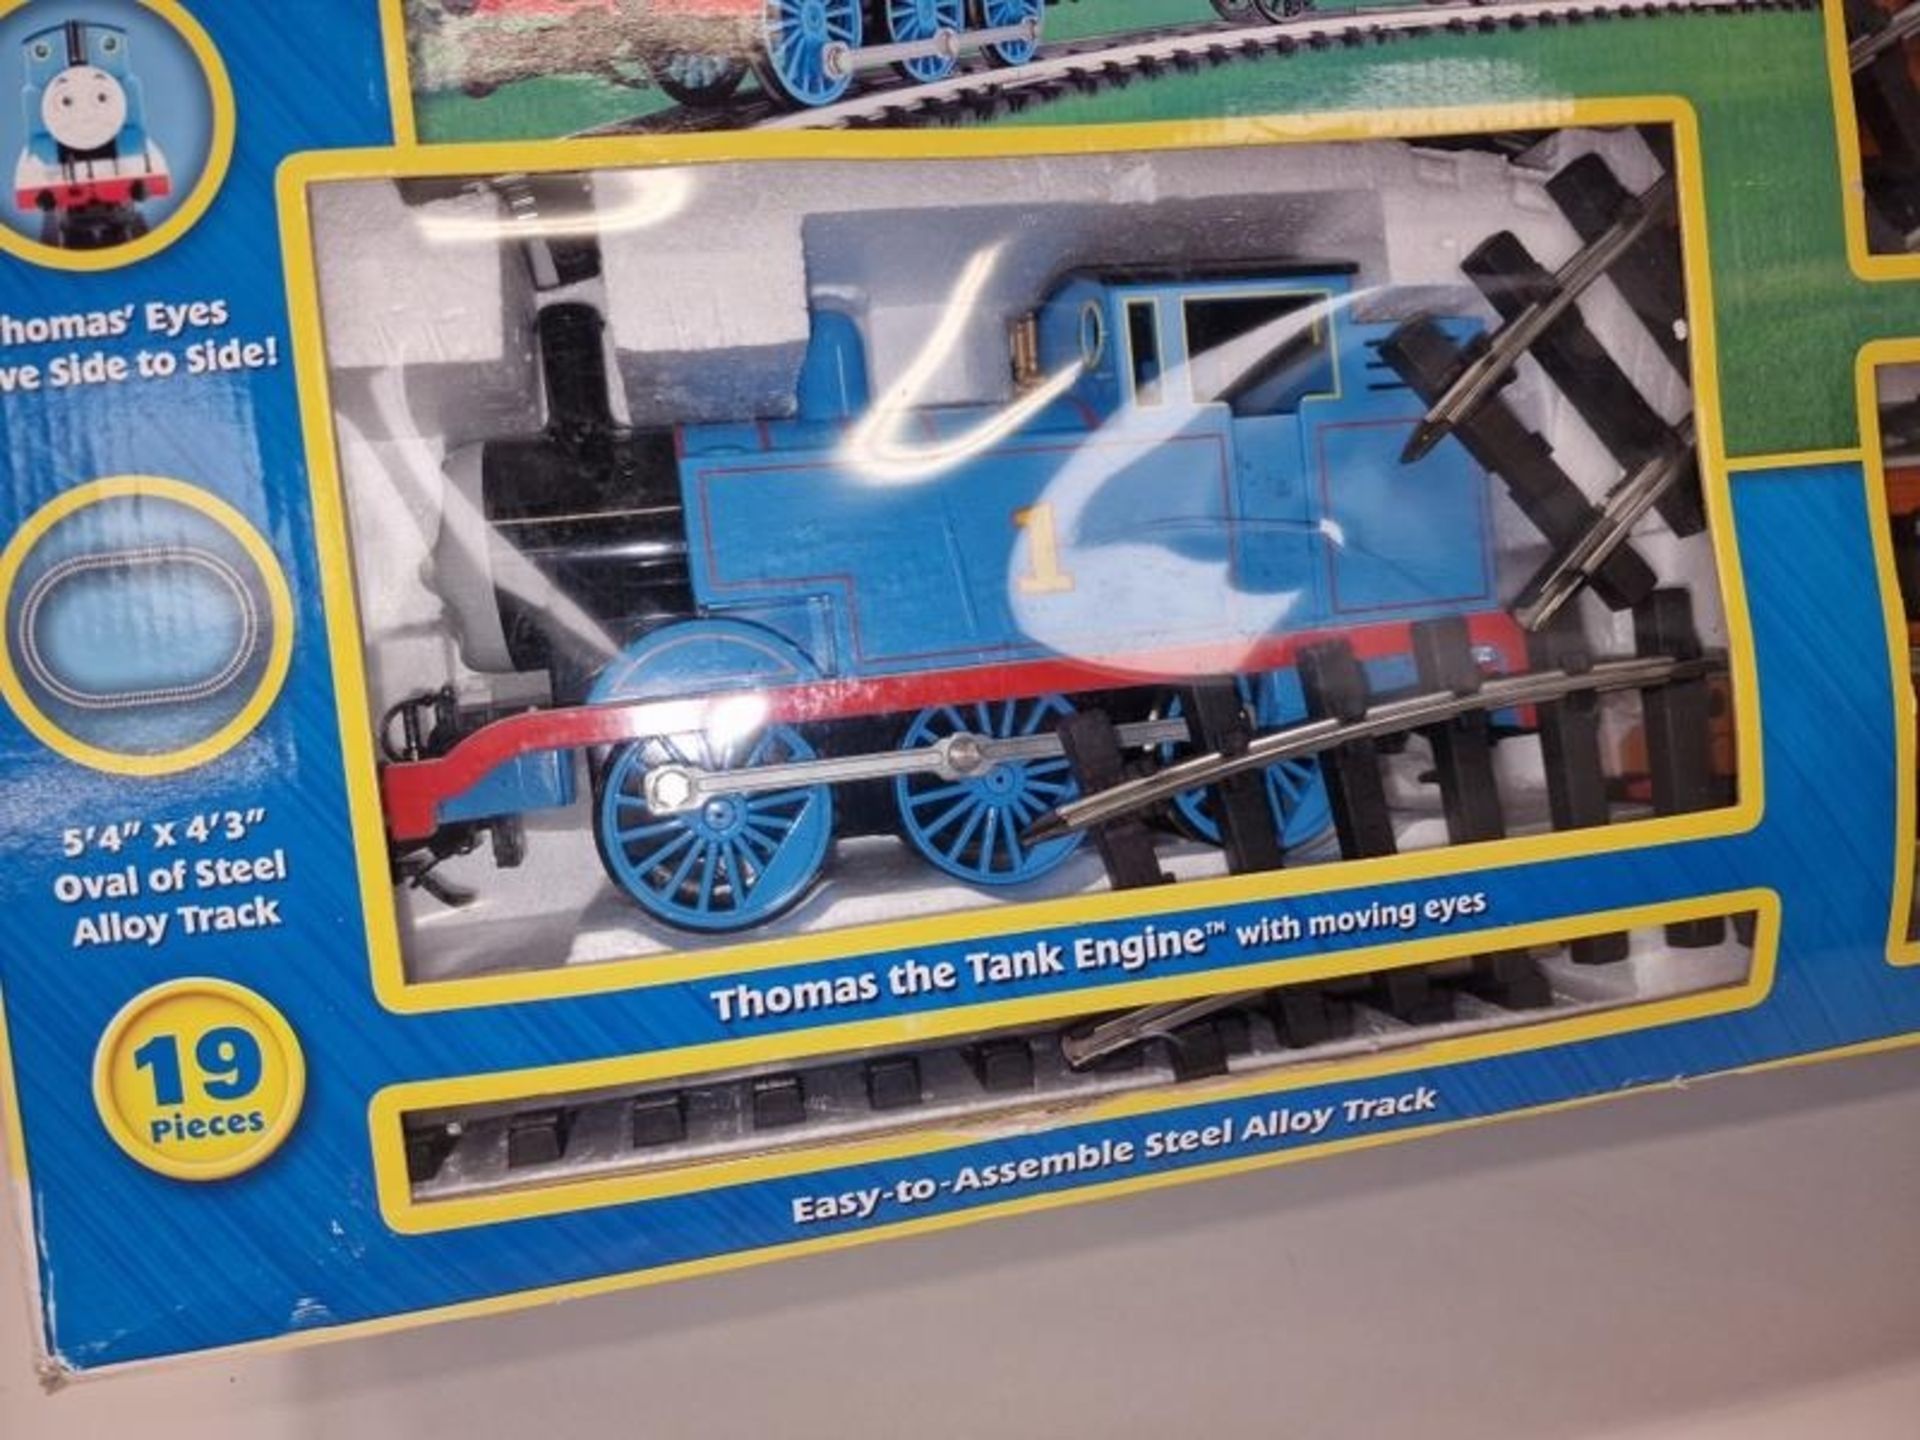 Bachmann Thomas & Friends Deluxe Thomas with Anne & Clarabel boxed 19 piece train set. Not checked - Image 2 of 4